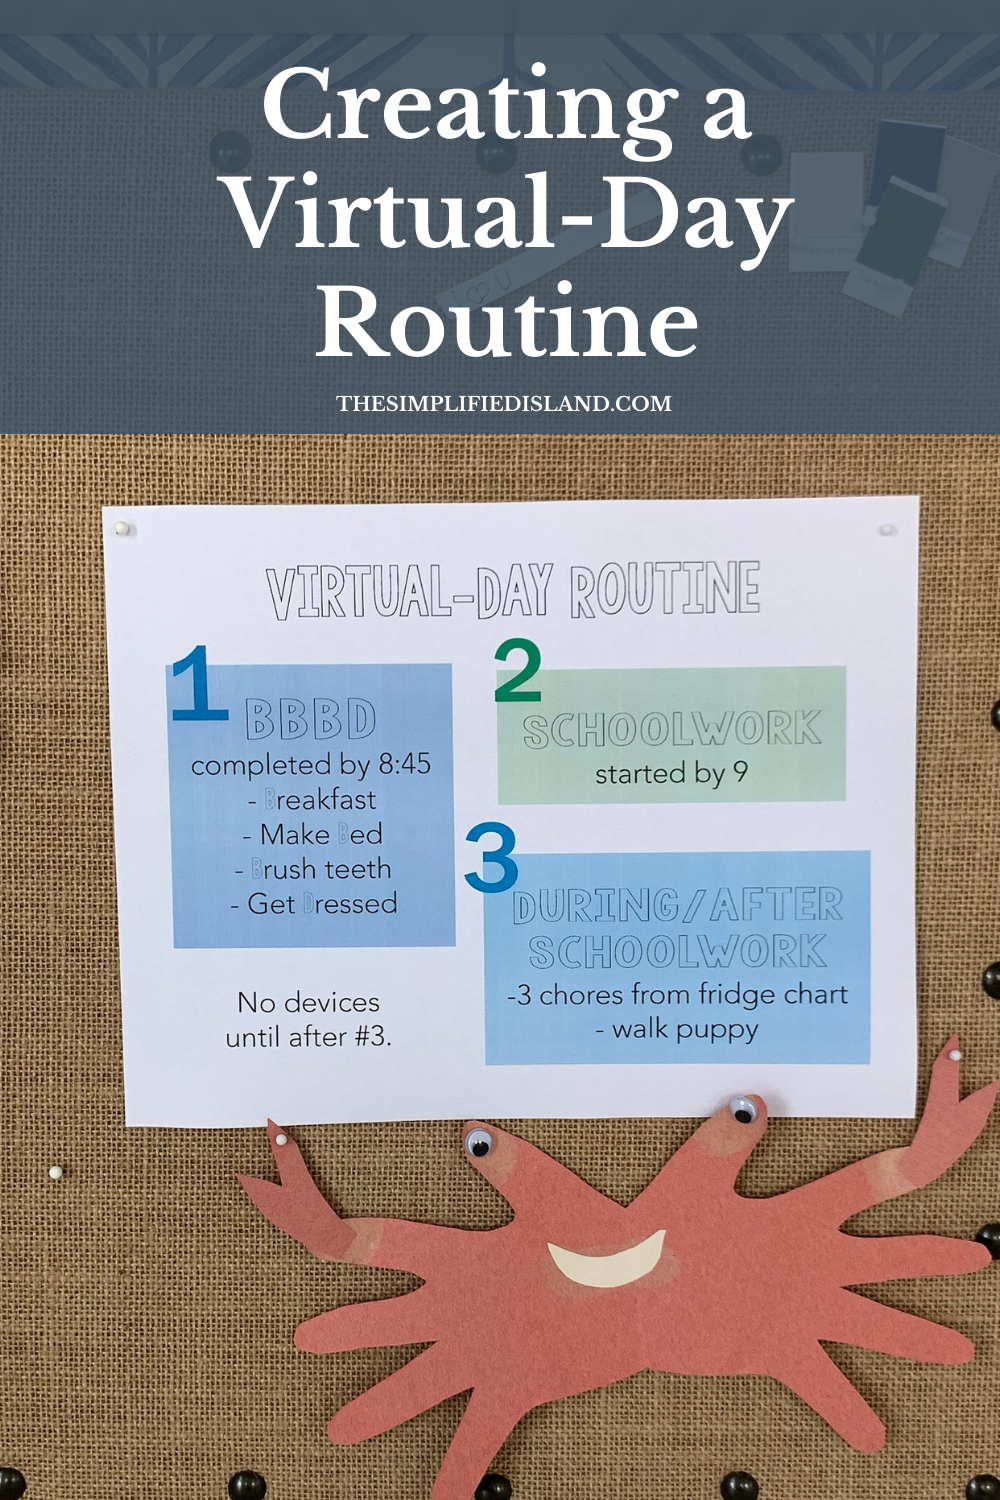 Create a Virtual-Day Routine - The Simplified Island